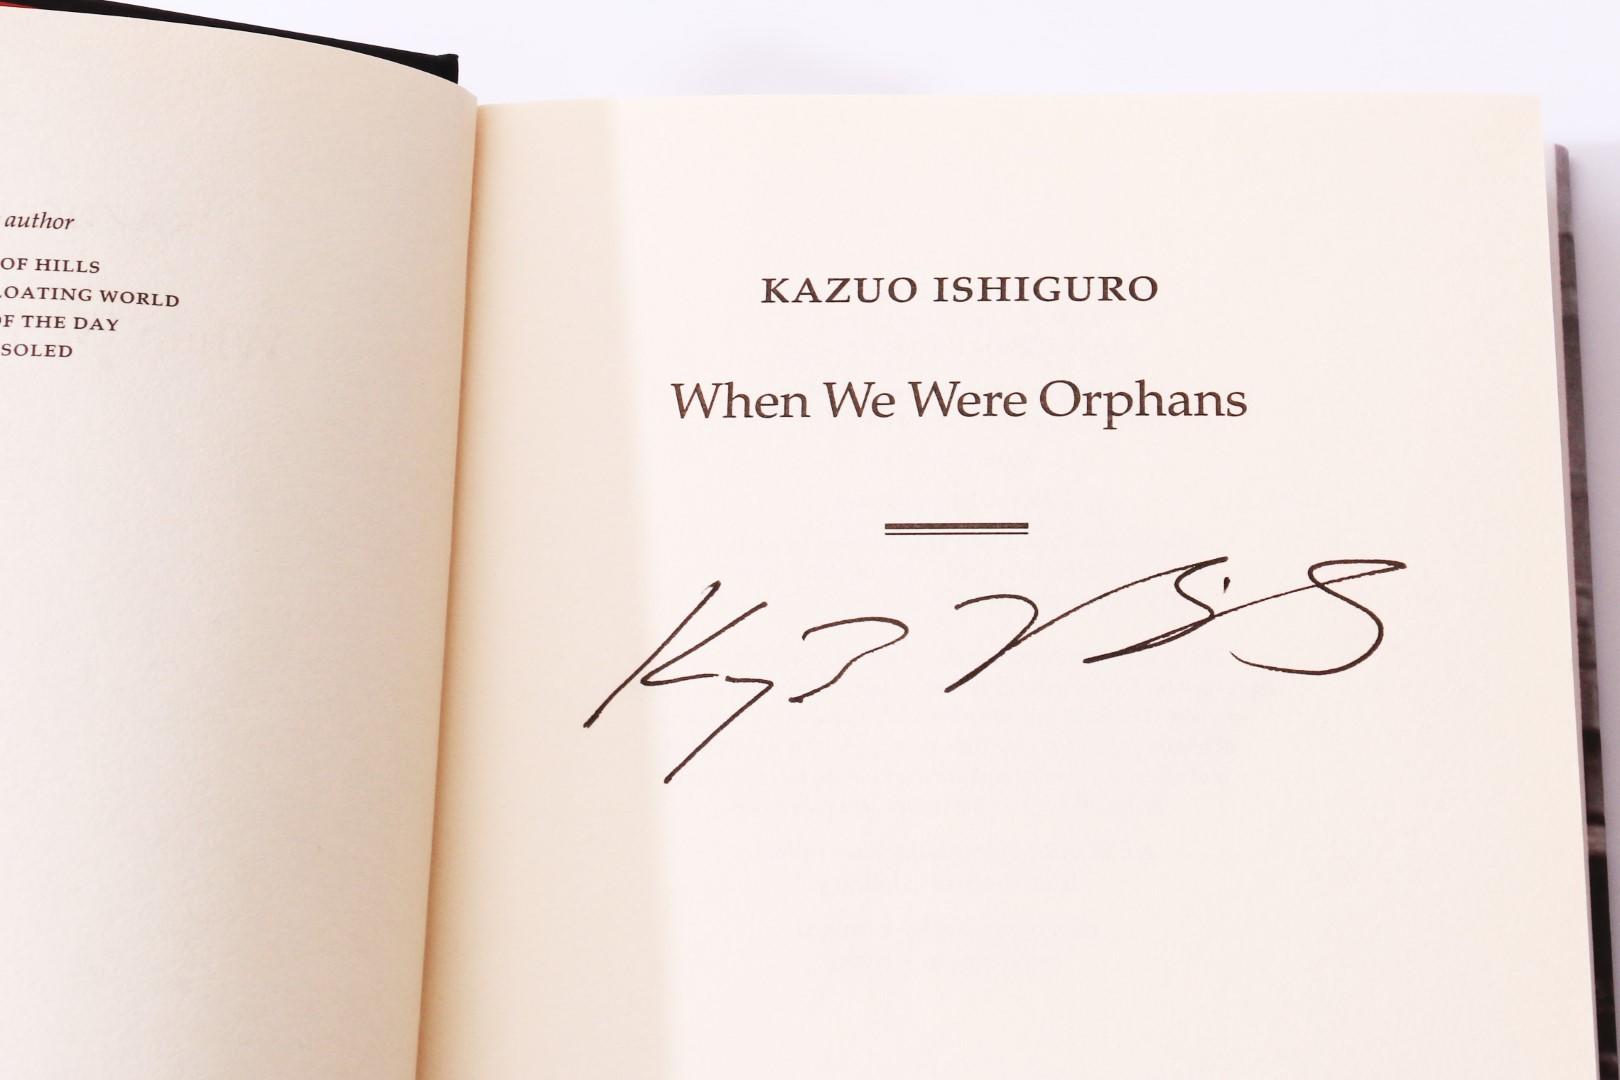 Kazuo Ishiguro - When We Were Orphans - Faber & Faber, 2000, Signed First Edition.